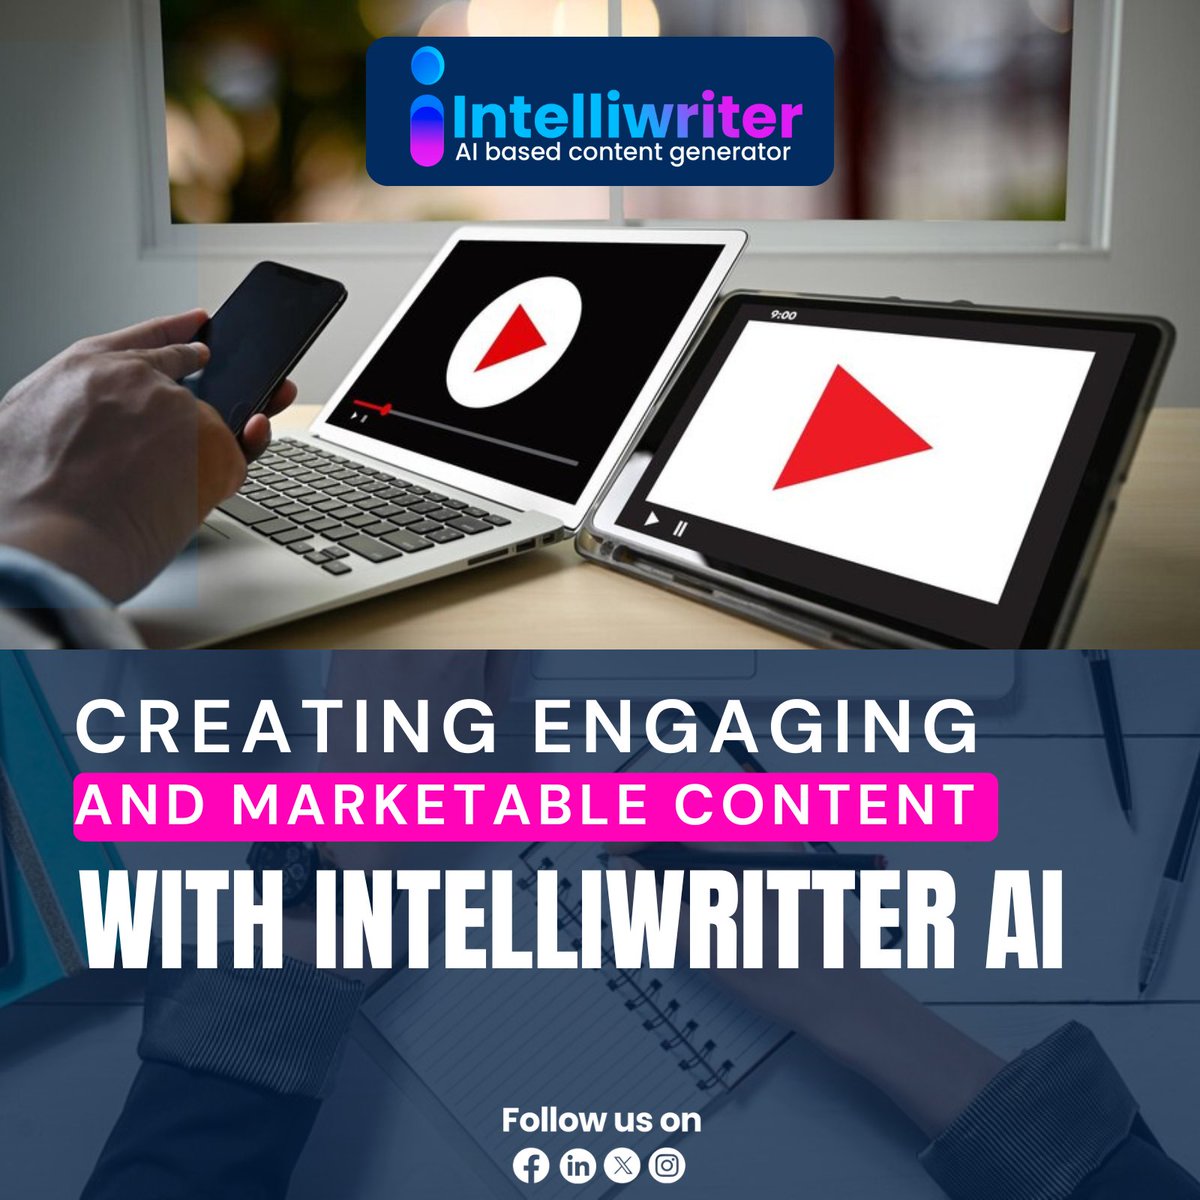 Harness the power of AI to create engaging and marketable content that captivates your audience and drives results. 
 
Ready to unlock the full potential of your content marketing strategy? Try Intelliwriter today!

intelliwriter.io
#Intelliwriter #AIbasedcontentgenerator